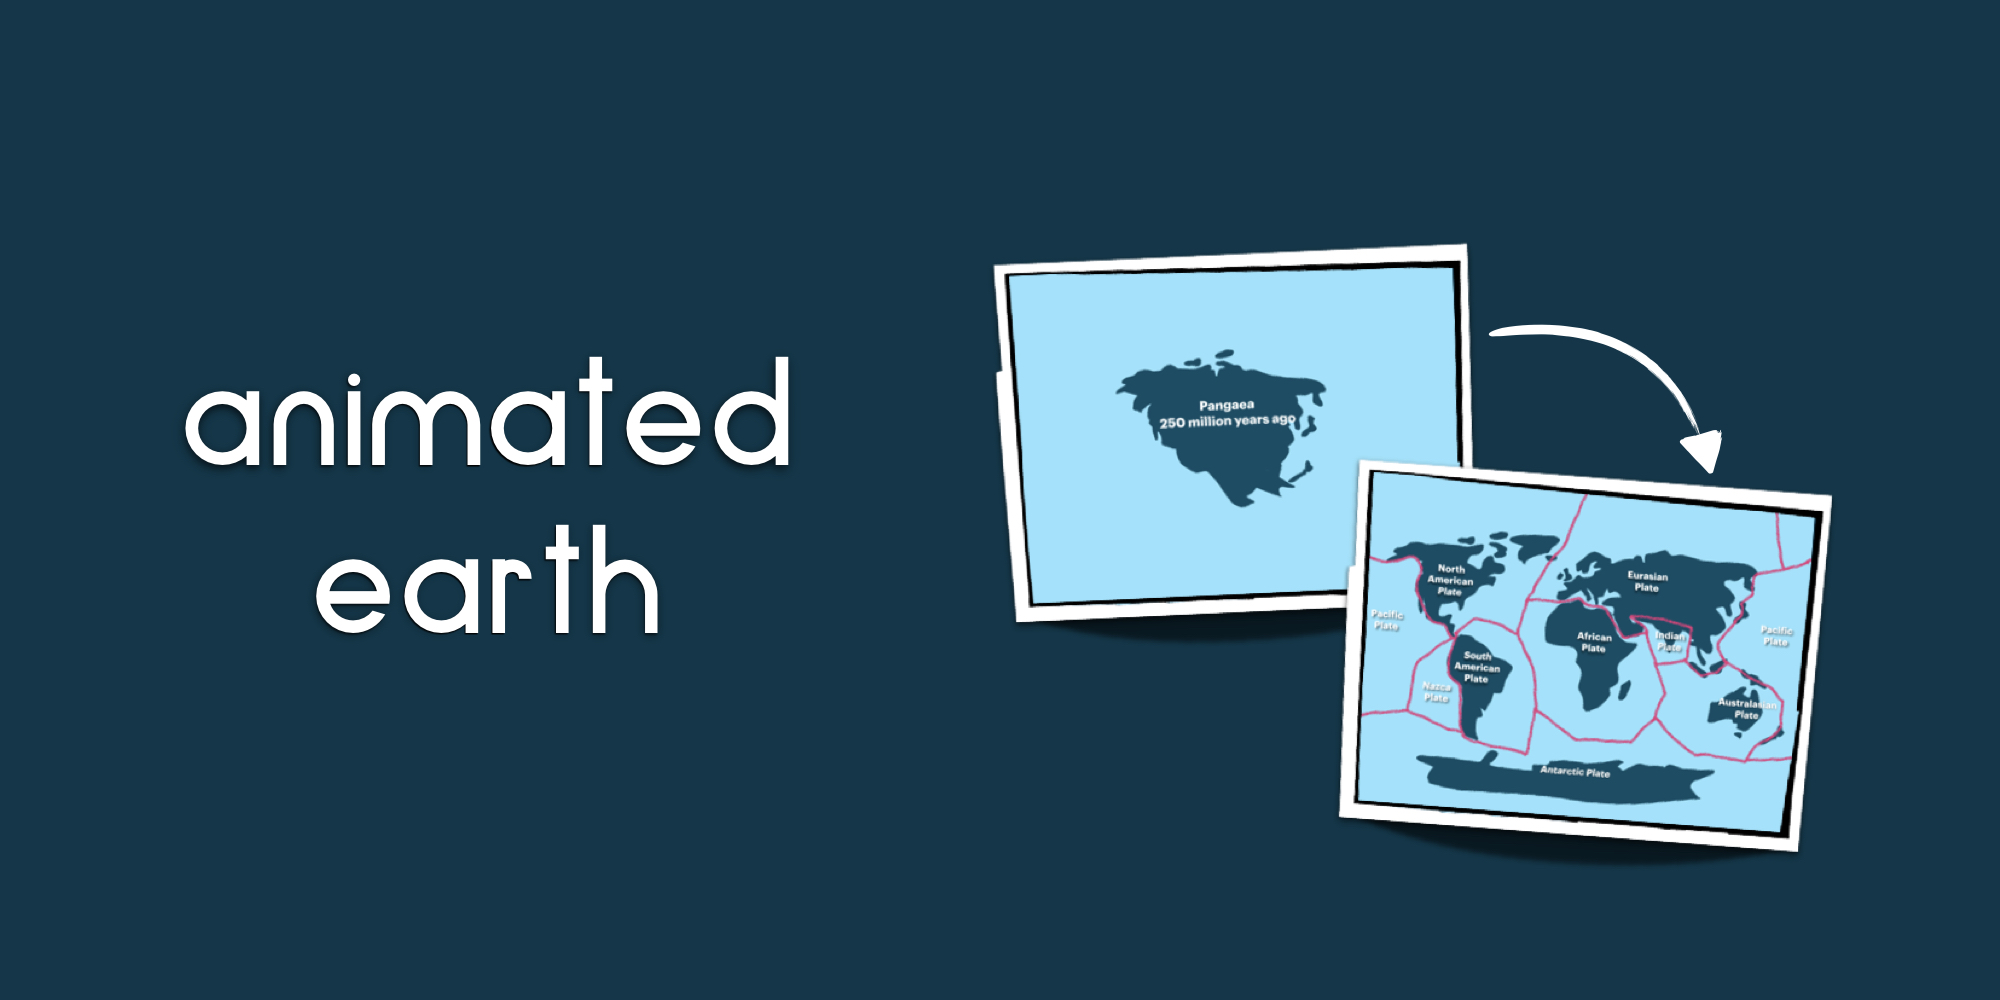 Animated Earth. Two slides showing the supercontinent Pangaea with an arrow indicating change to the continents we know today